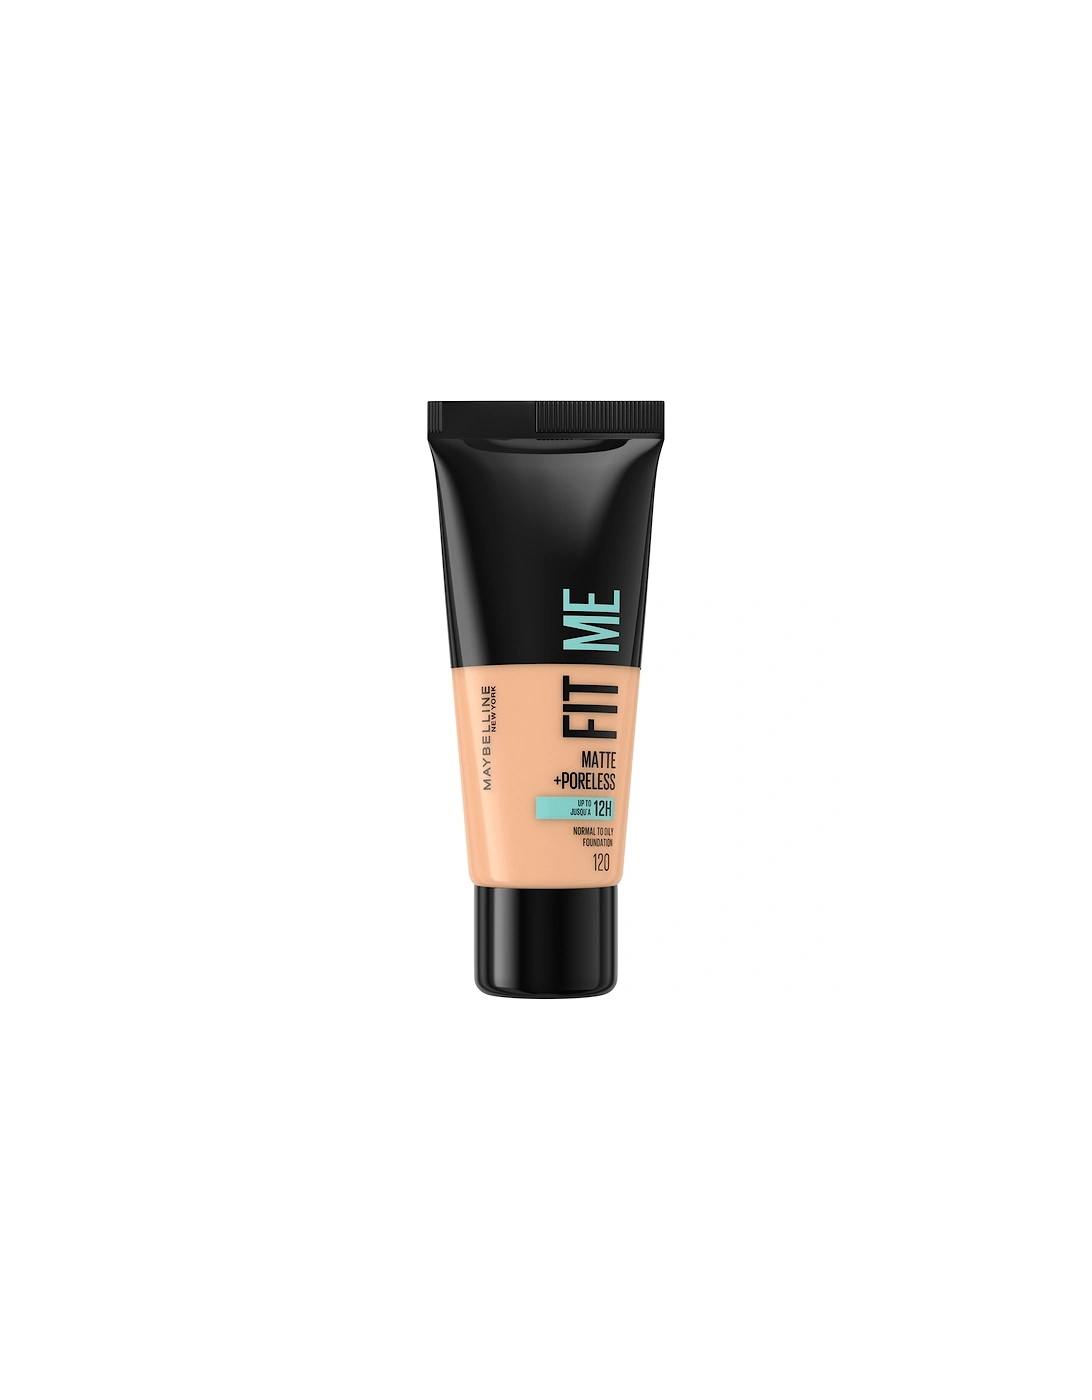 Fit Me! Matte and Poreless Foundation - 120 Classic Ivory - - Fit Me! Matte and Poreless Foundation 30ml (Various Shades) - Foundation - Fit Me! Matte and Poreless Foundation 30ml (Various Shades) - Tina - Fit Me! Matte and Poreless Foundation 30ml (Various Shades) - Jo, 2 of 1